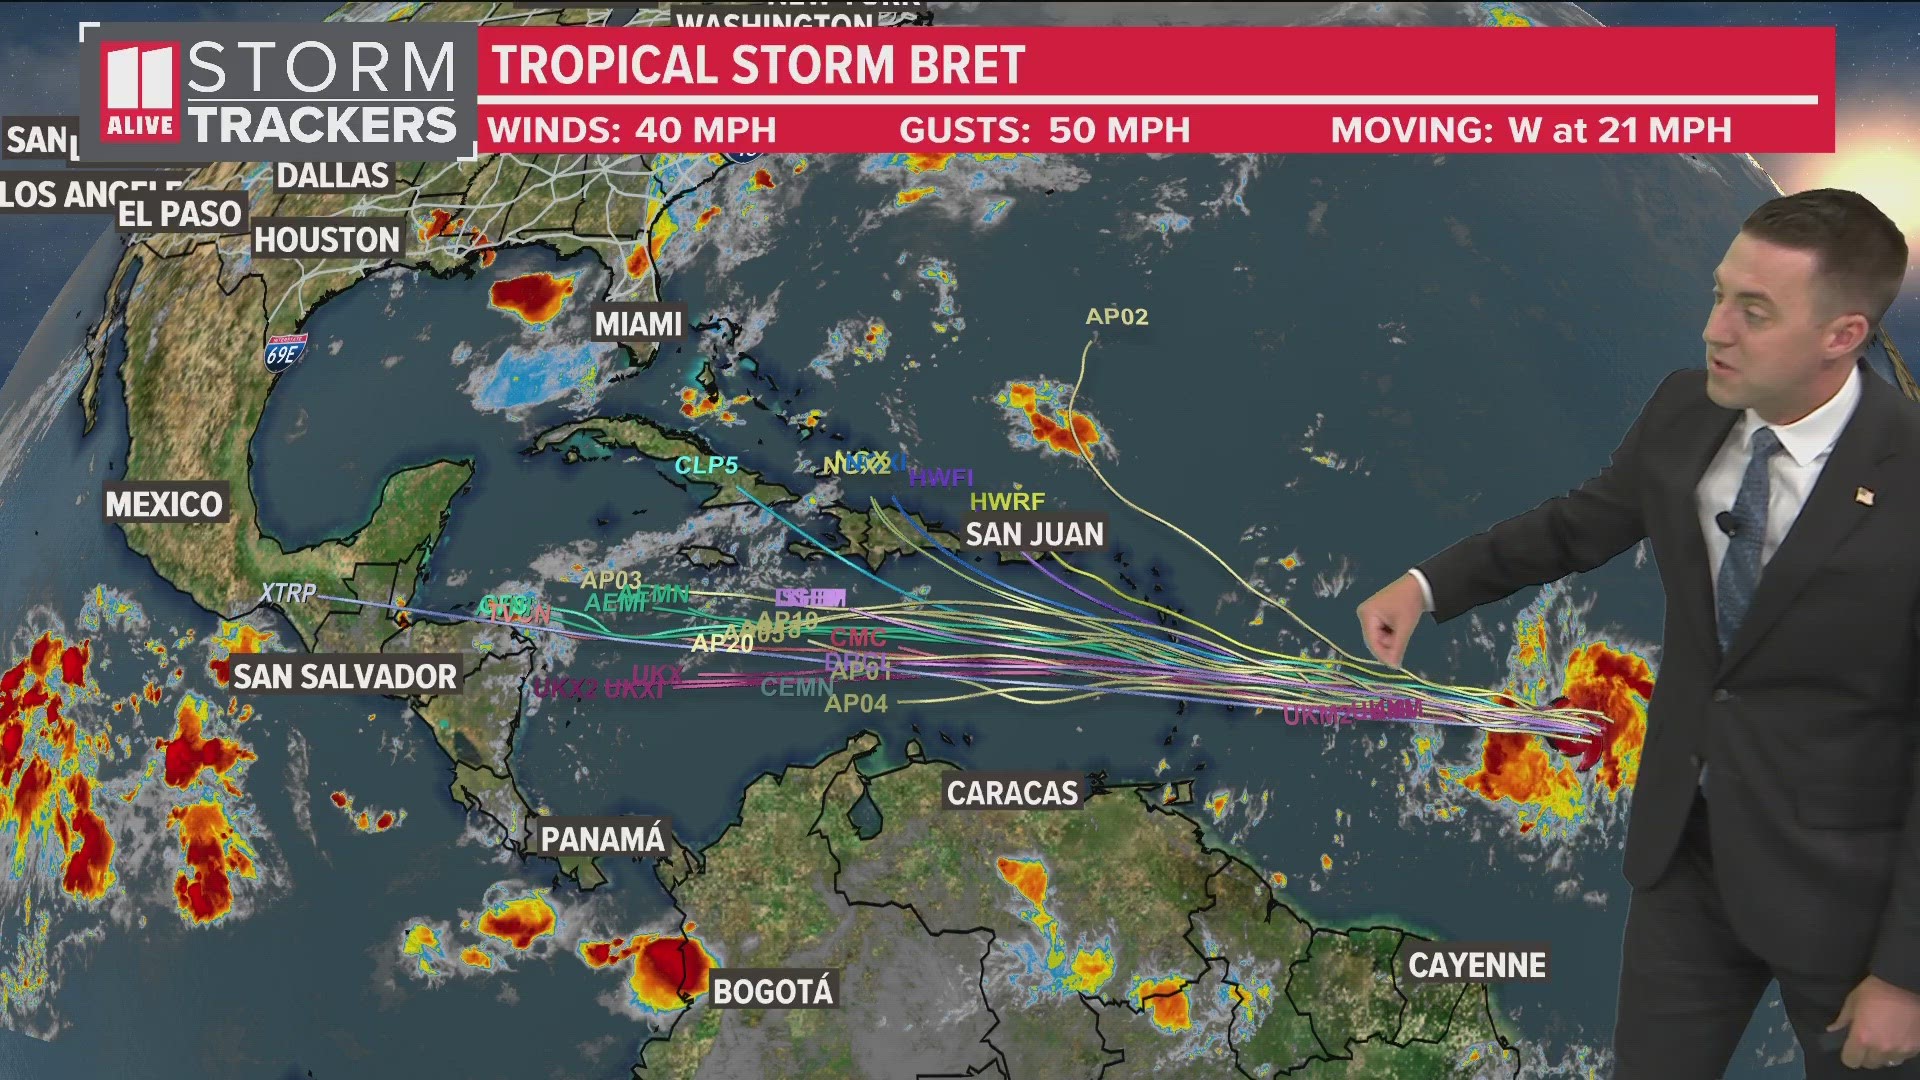 At this time, the storm is expected to move into the Caribbean.